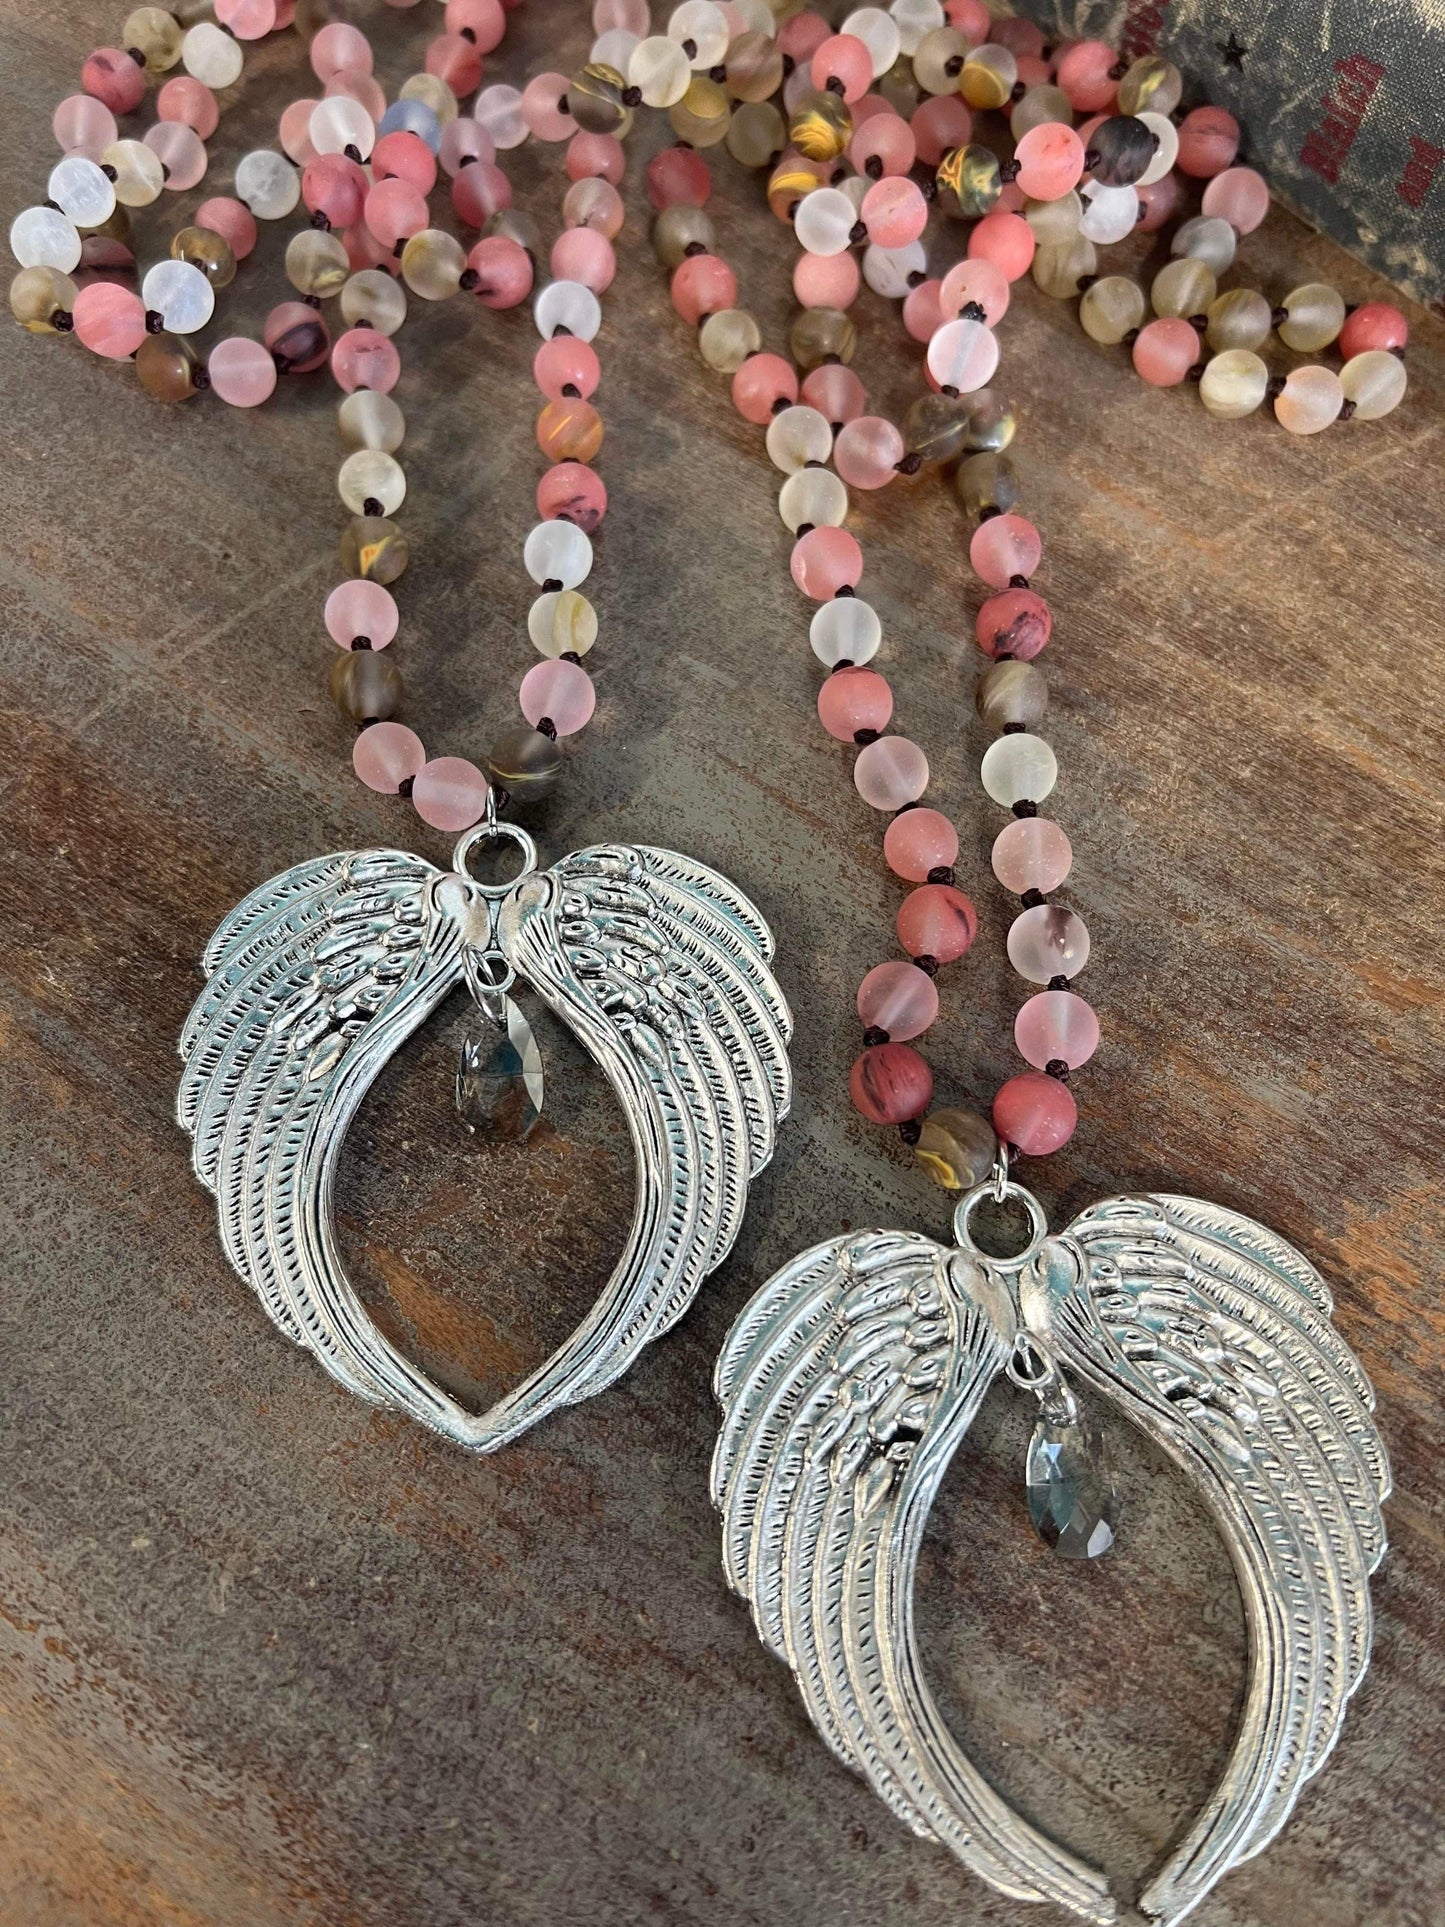 Natural stone bead with Angel wings pendant